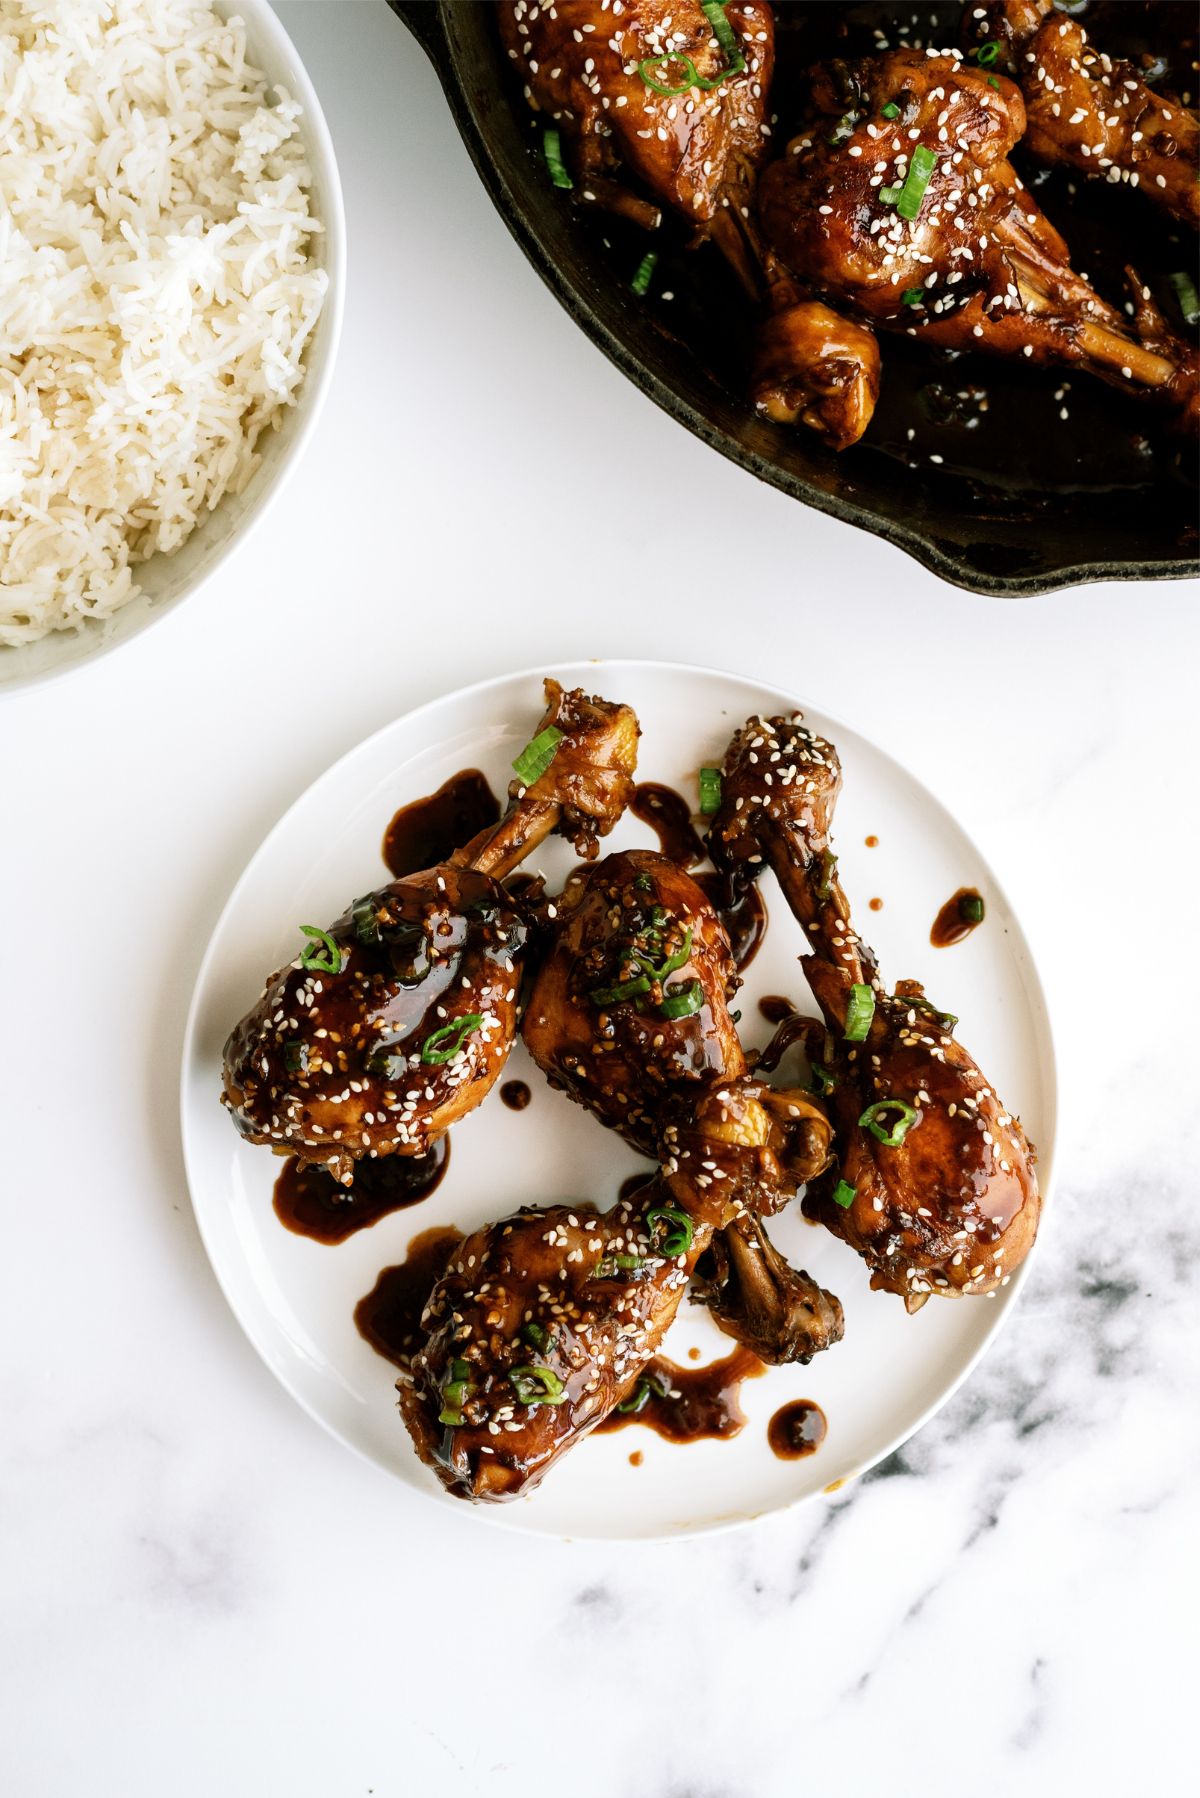 Plate of Asian Glazed Chicken Drumsticks on a table